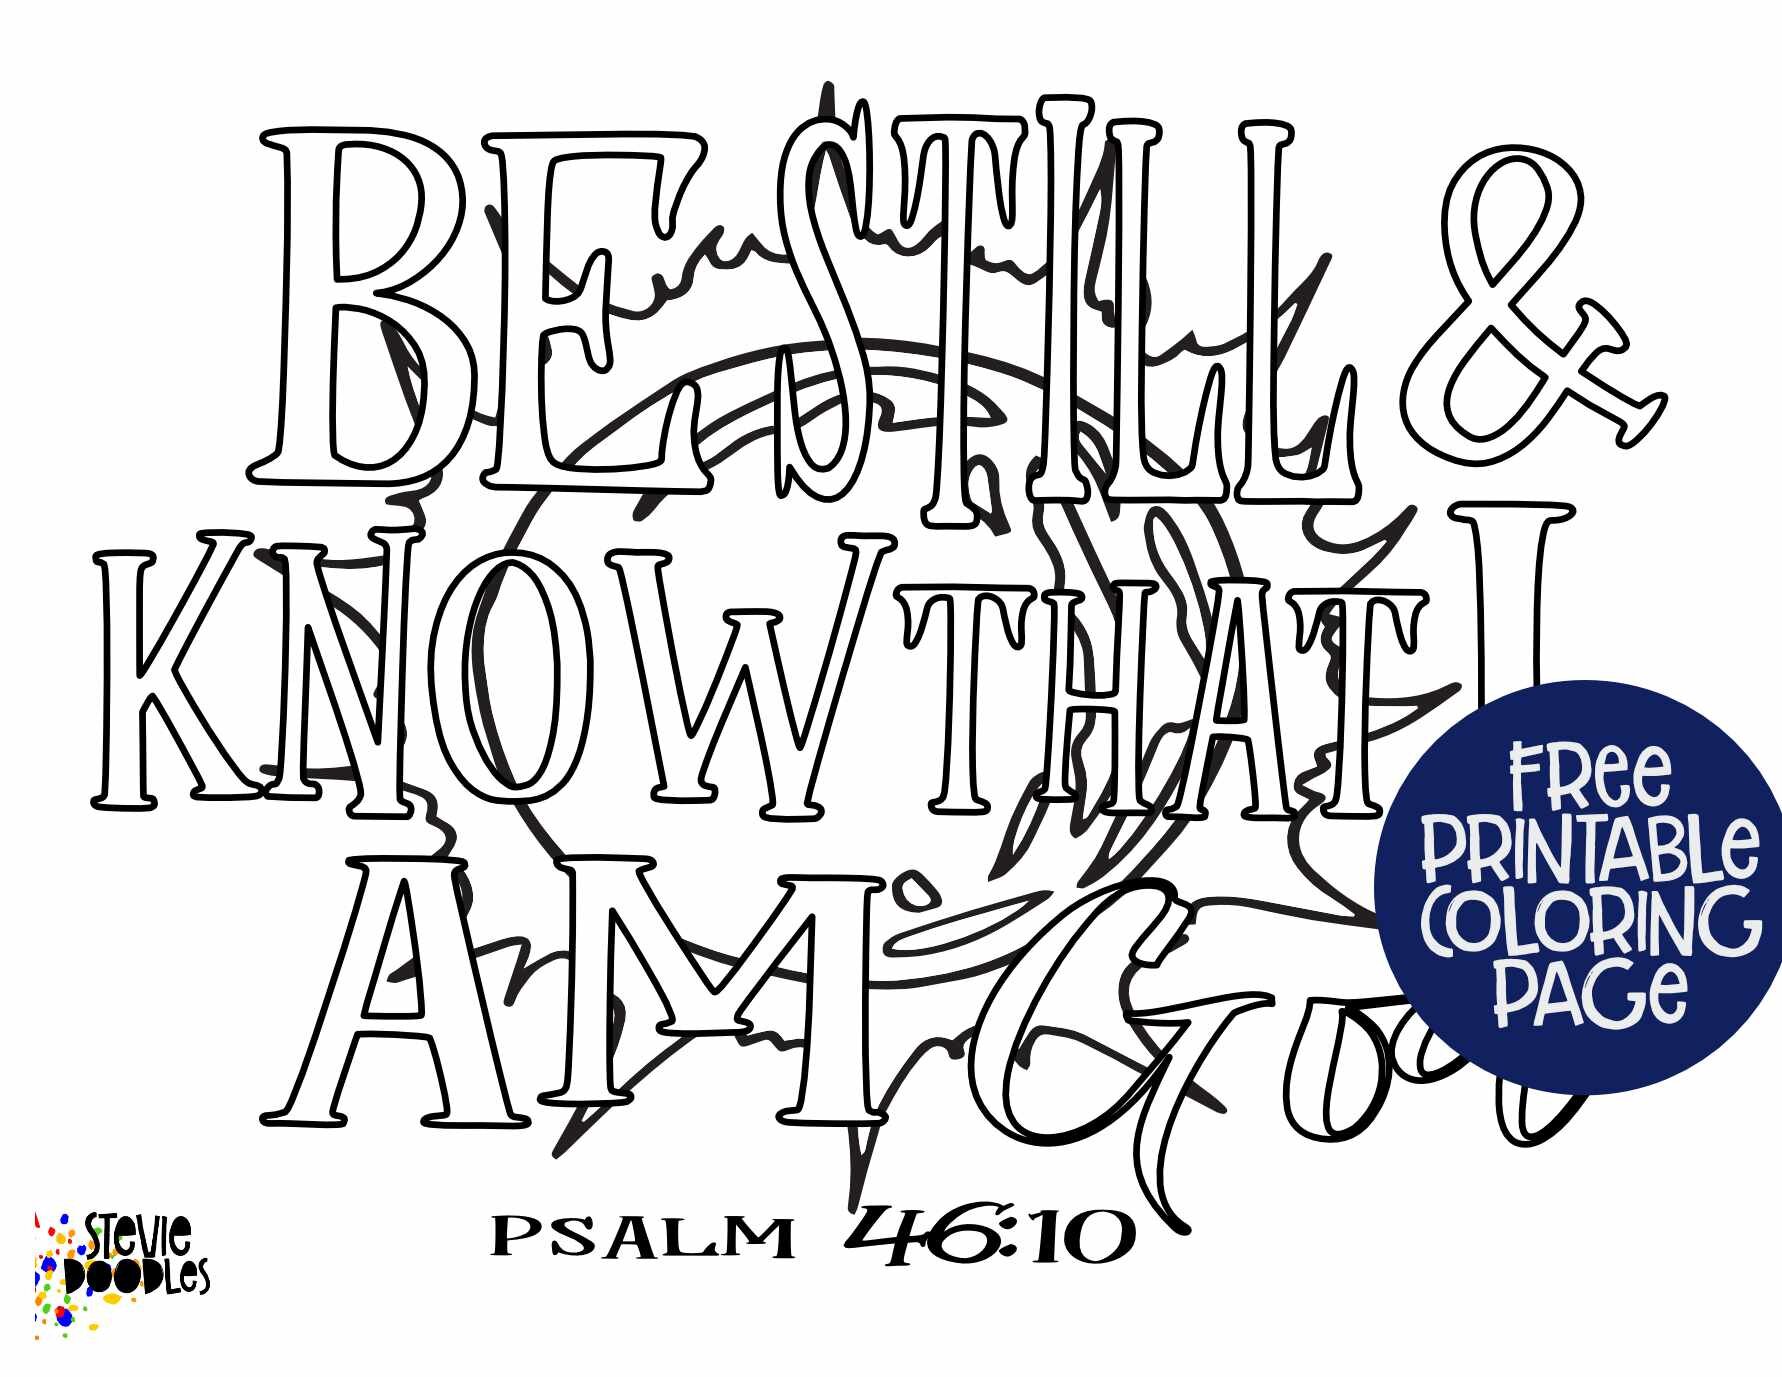 5 Free Printables! 4 Memory Verses on 1 page + each page as a separate printable coloring page Be still and know that I am God - Psalm 46:10